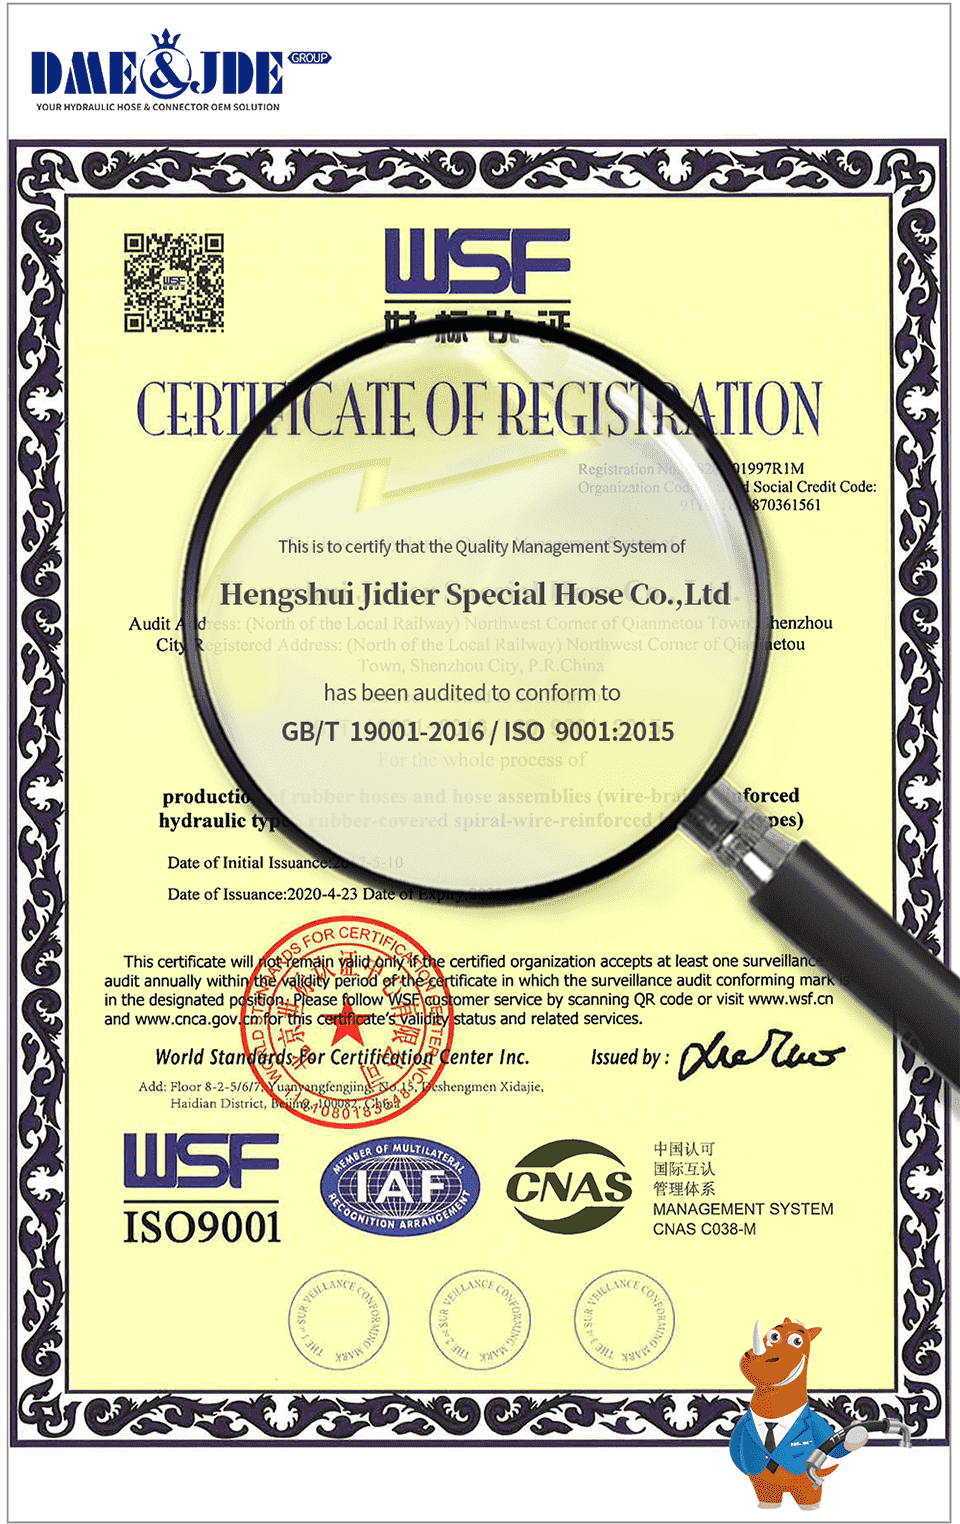 A GB/T 19001-2016 / ISO 9001:2015 certification cover